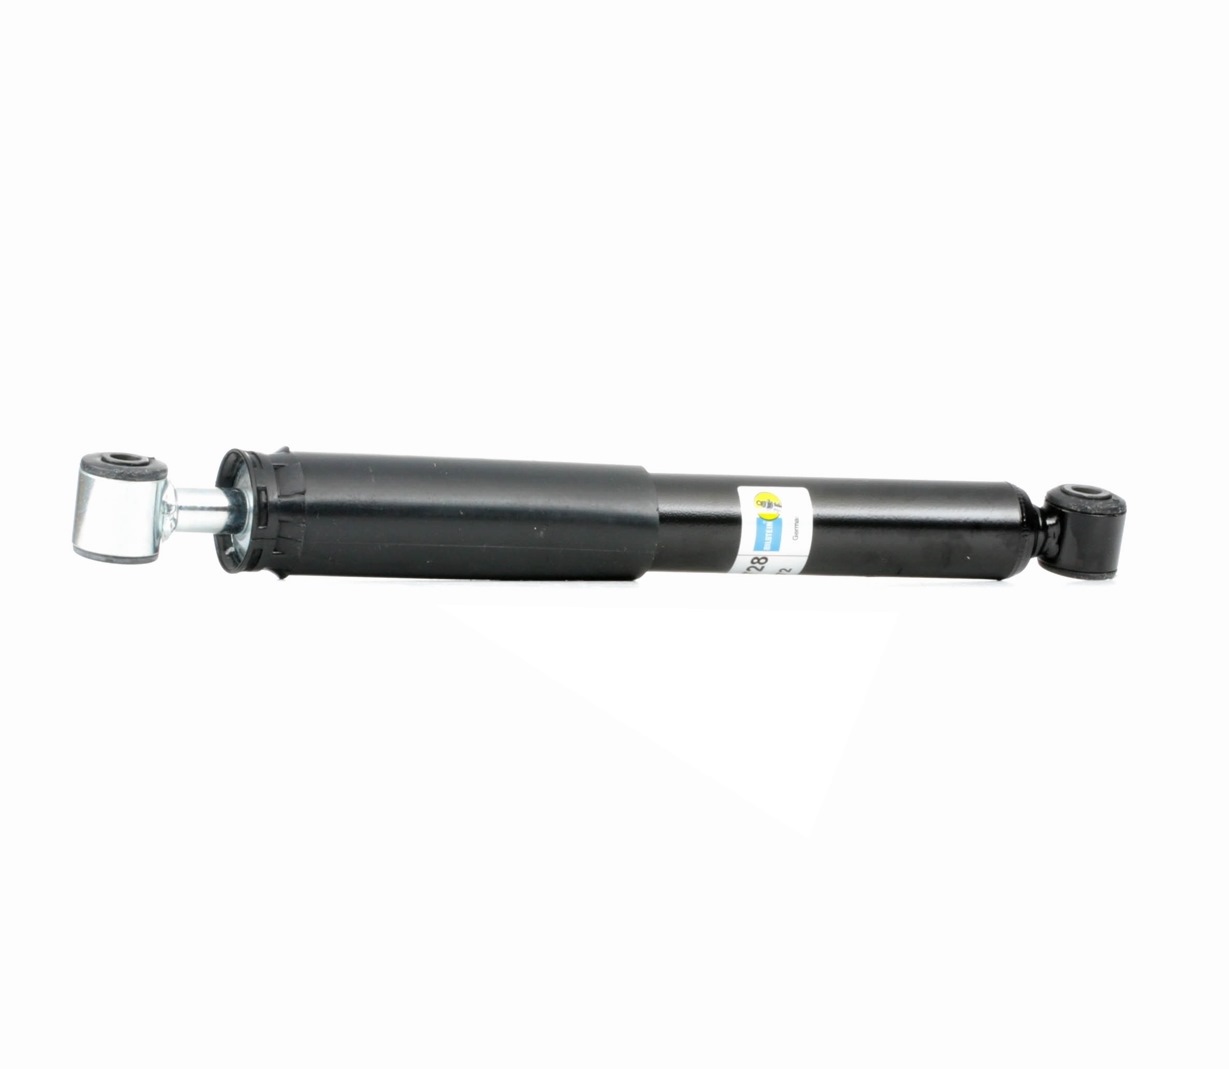 BILSTEIN - B4 OE Replacement 19-111728 Shock absorber Rear Axle, Gas Pressure, Twin-Tube, Absorber does not carry a spring, Top eye, Bottom eye